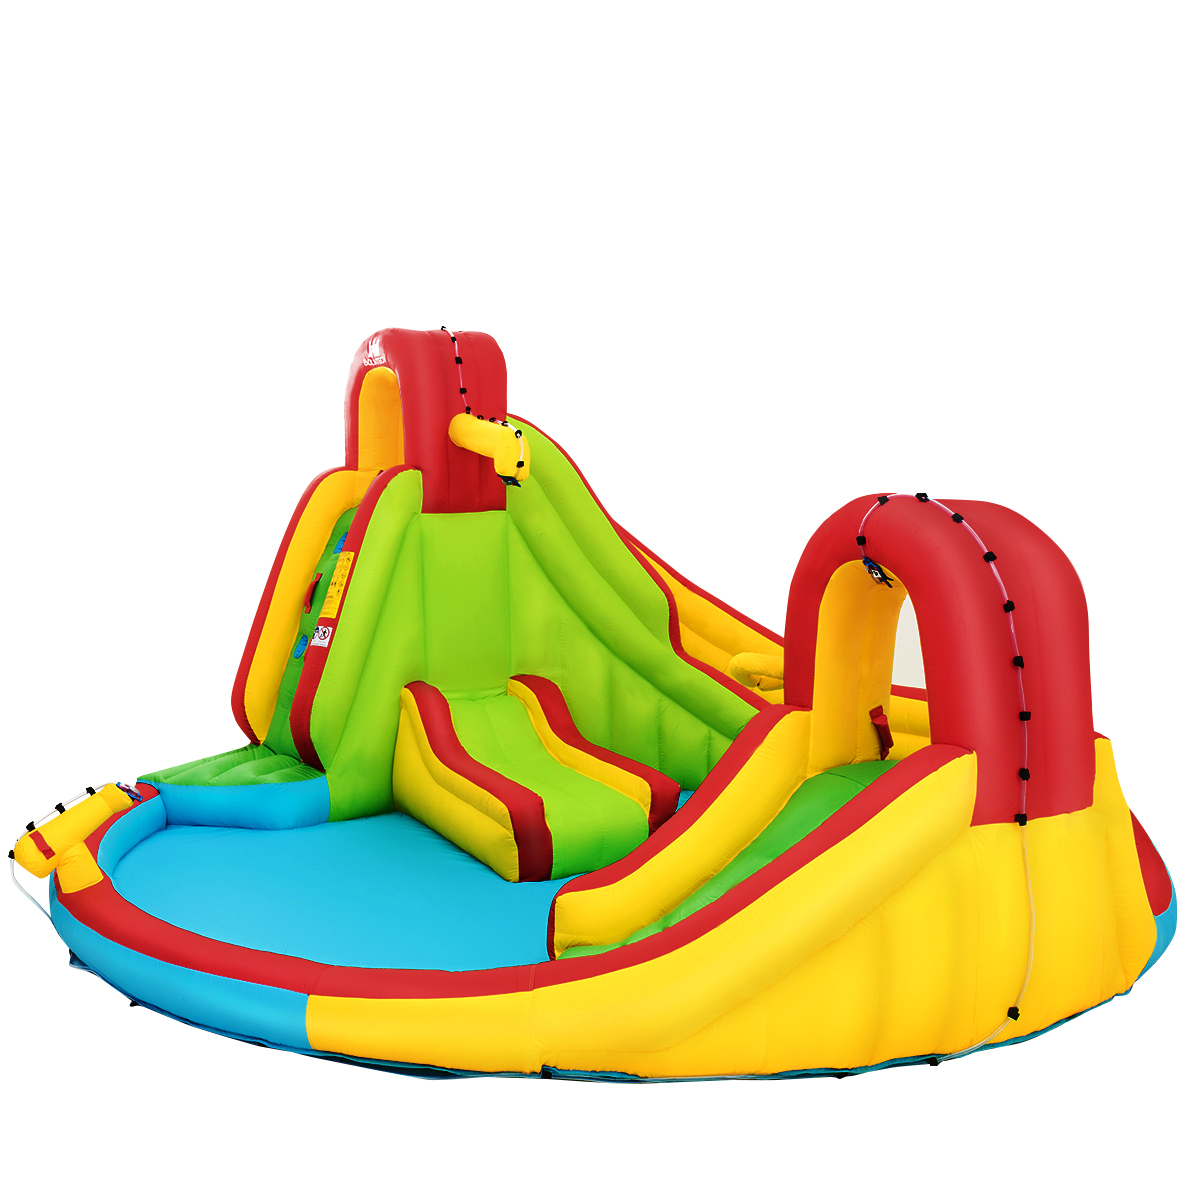 Costway Kids Inflatable Water Slide Bounce Park Splash Pool with Water Cannon & 480W Blower - image 9 of 10